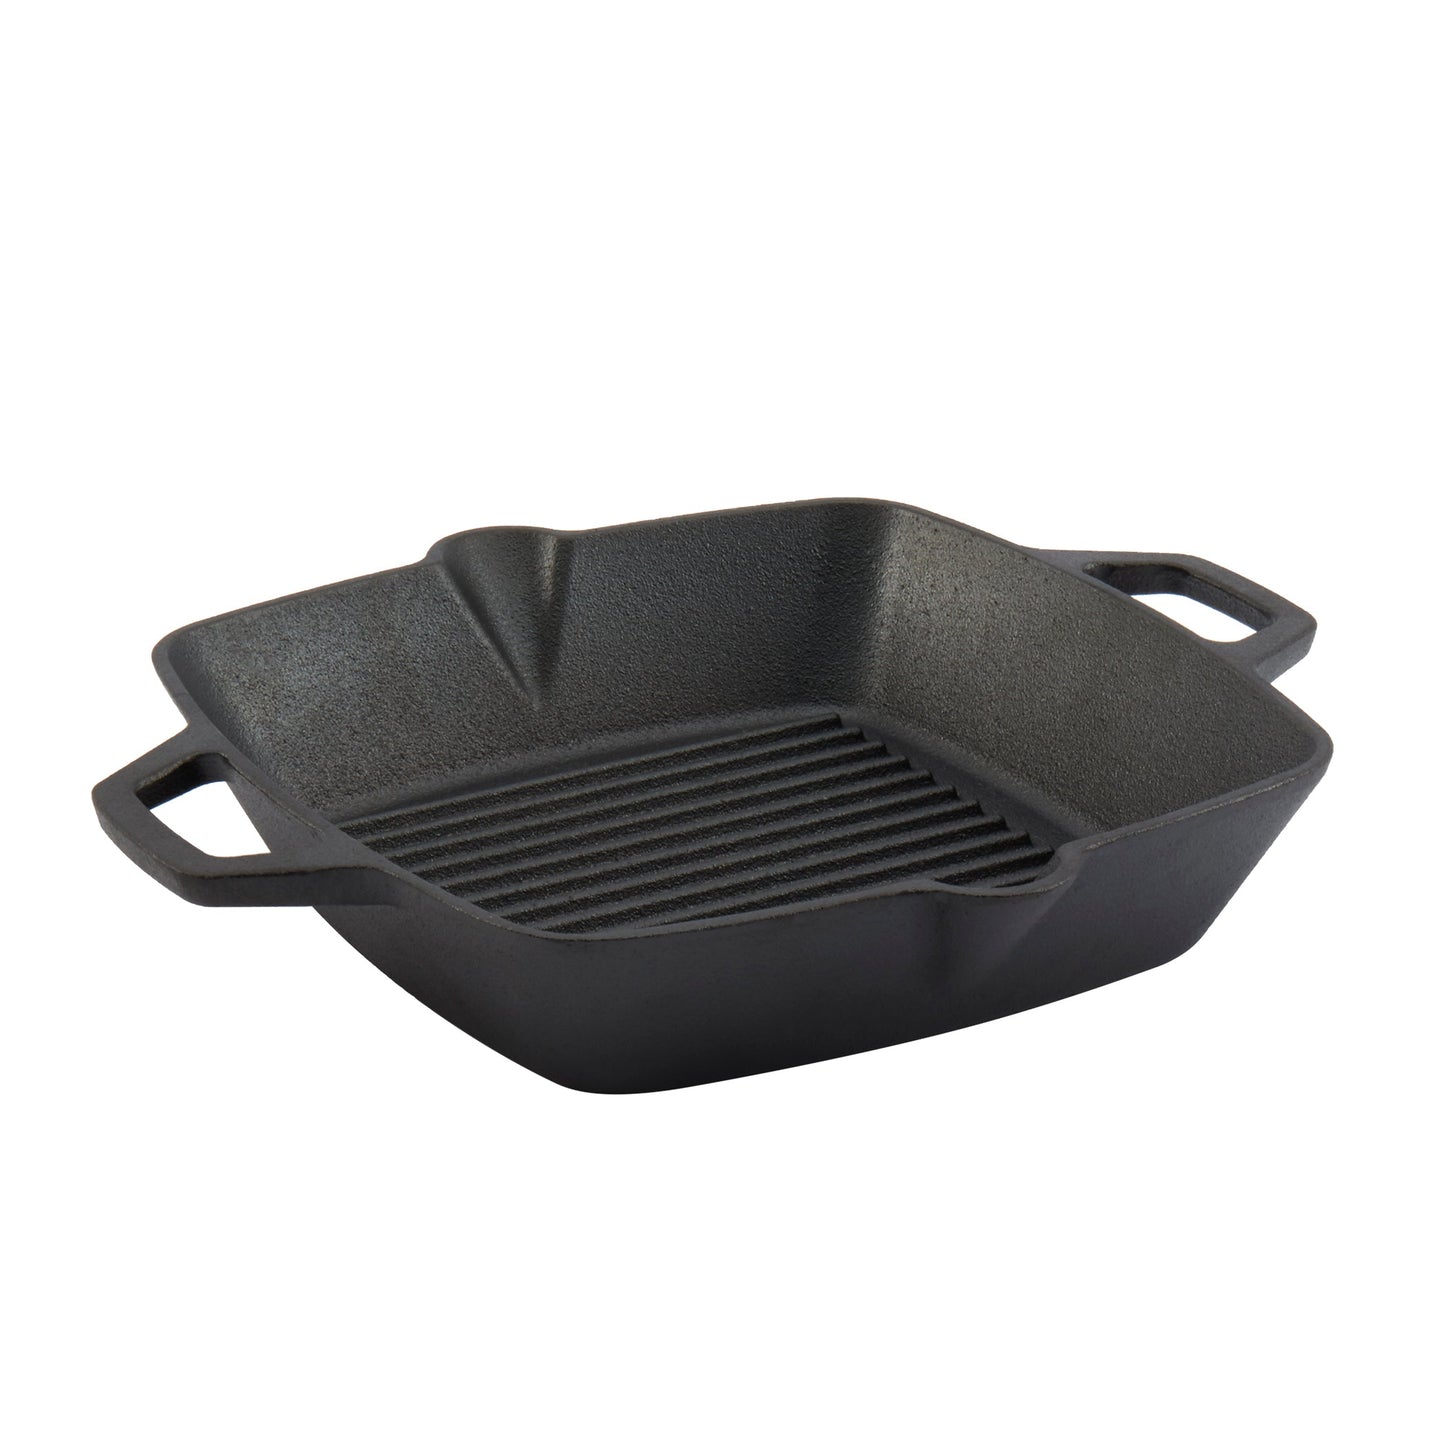 9" CAST IRON SQUARE GRILL PAN